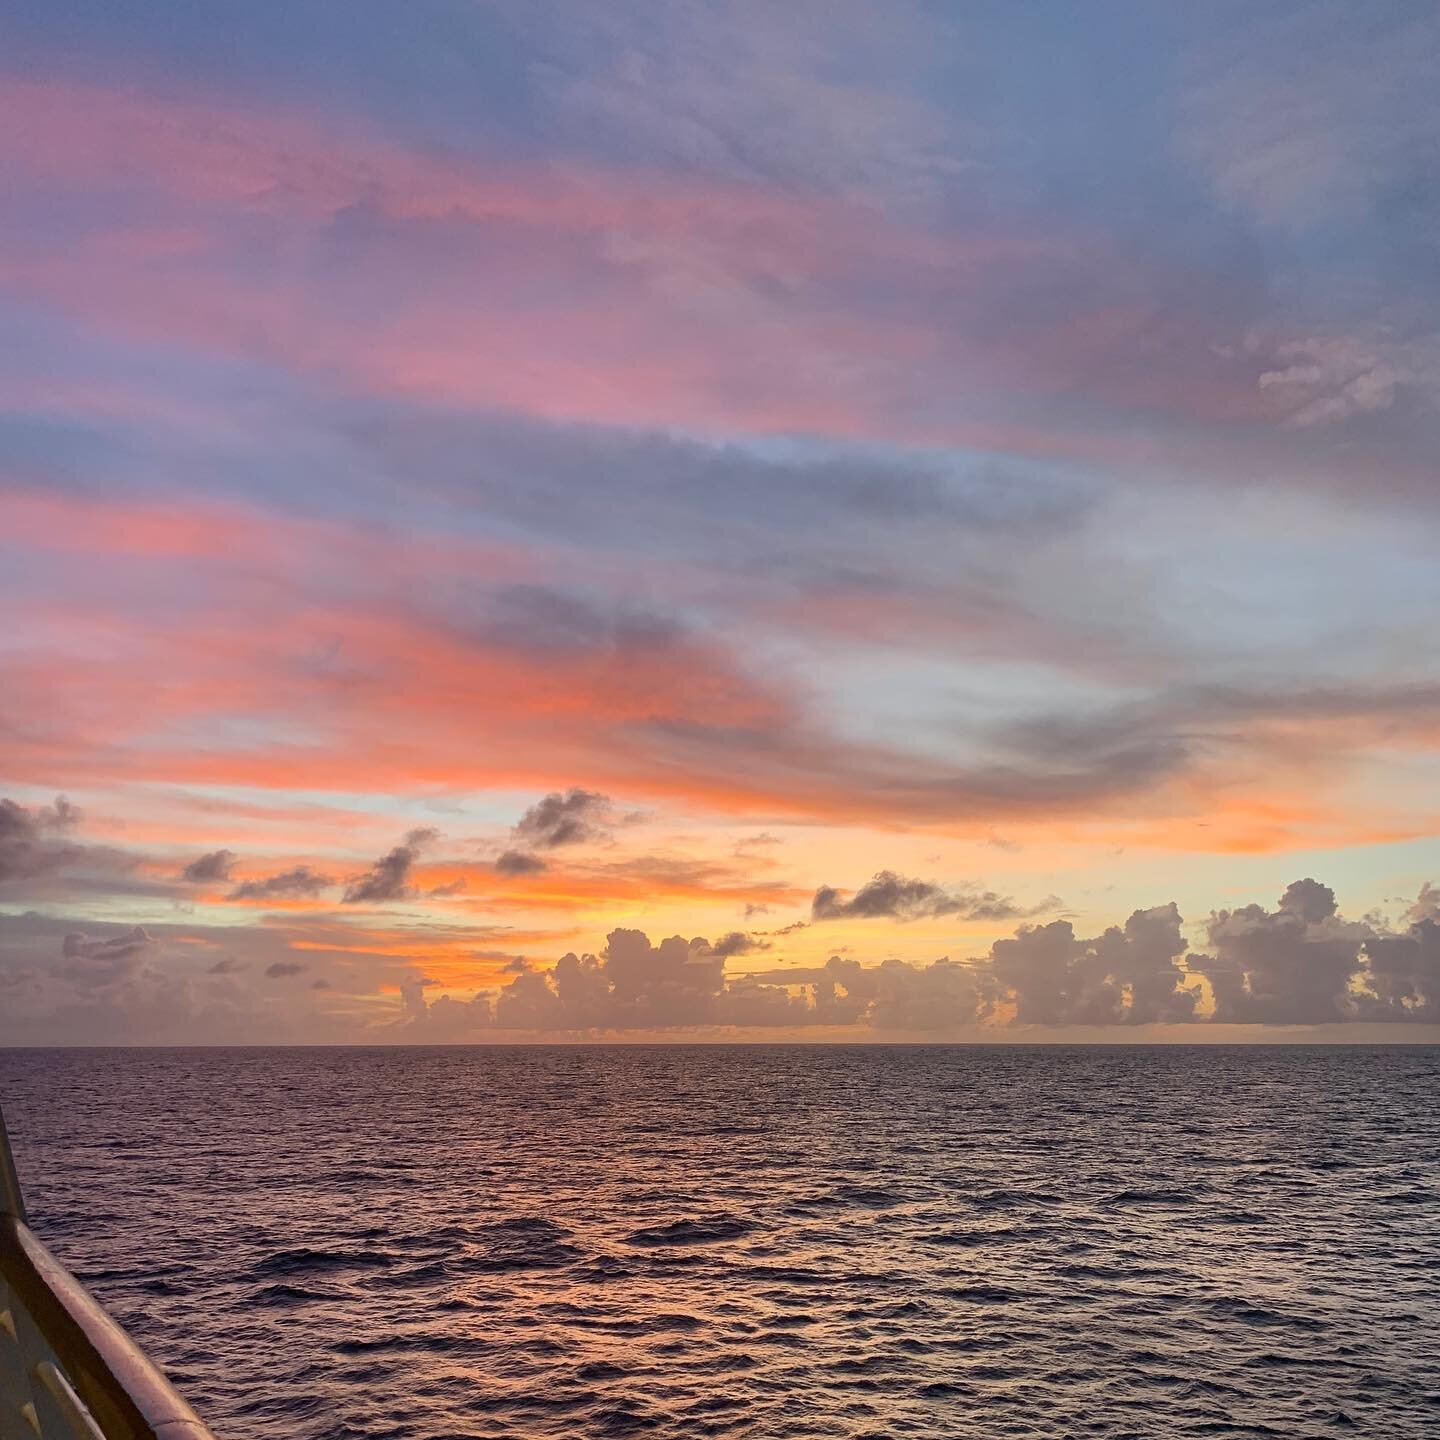 This year I learned how many colors the sky can be 🛶
.
.
.
.
.
.
.
.
.
.
.
.
#sunset #sunsetphotography #sunrise #miami #stmaarten #stthomas #virginislands #symphonyoftheseas #cruiselife #actorlife #oceanphotography #cozumel #costamaya #puertorico #